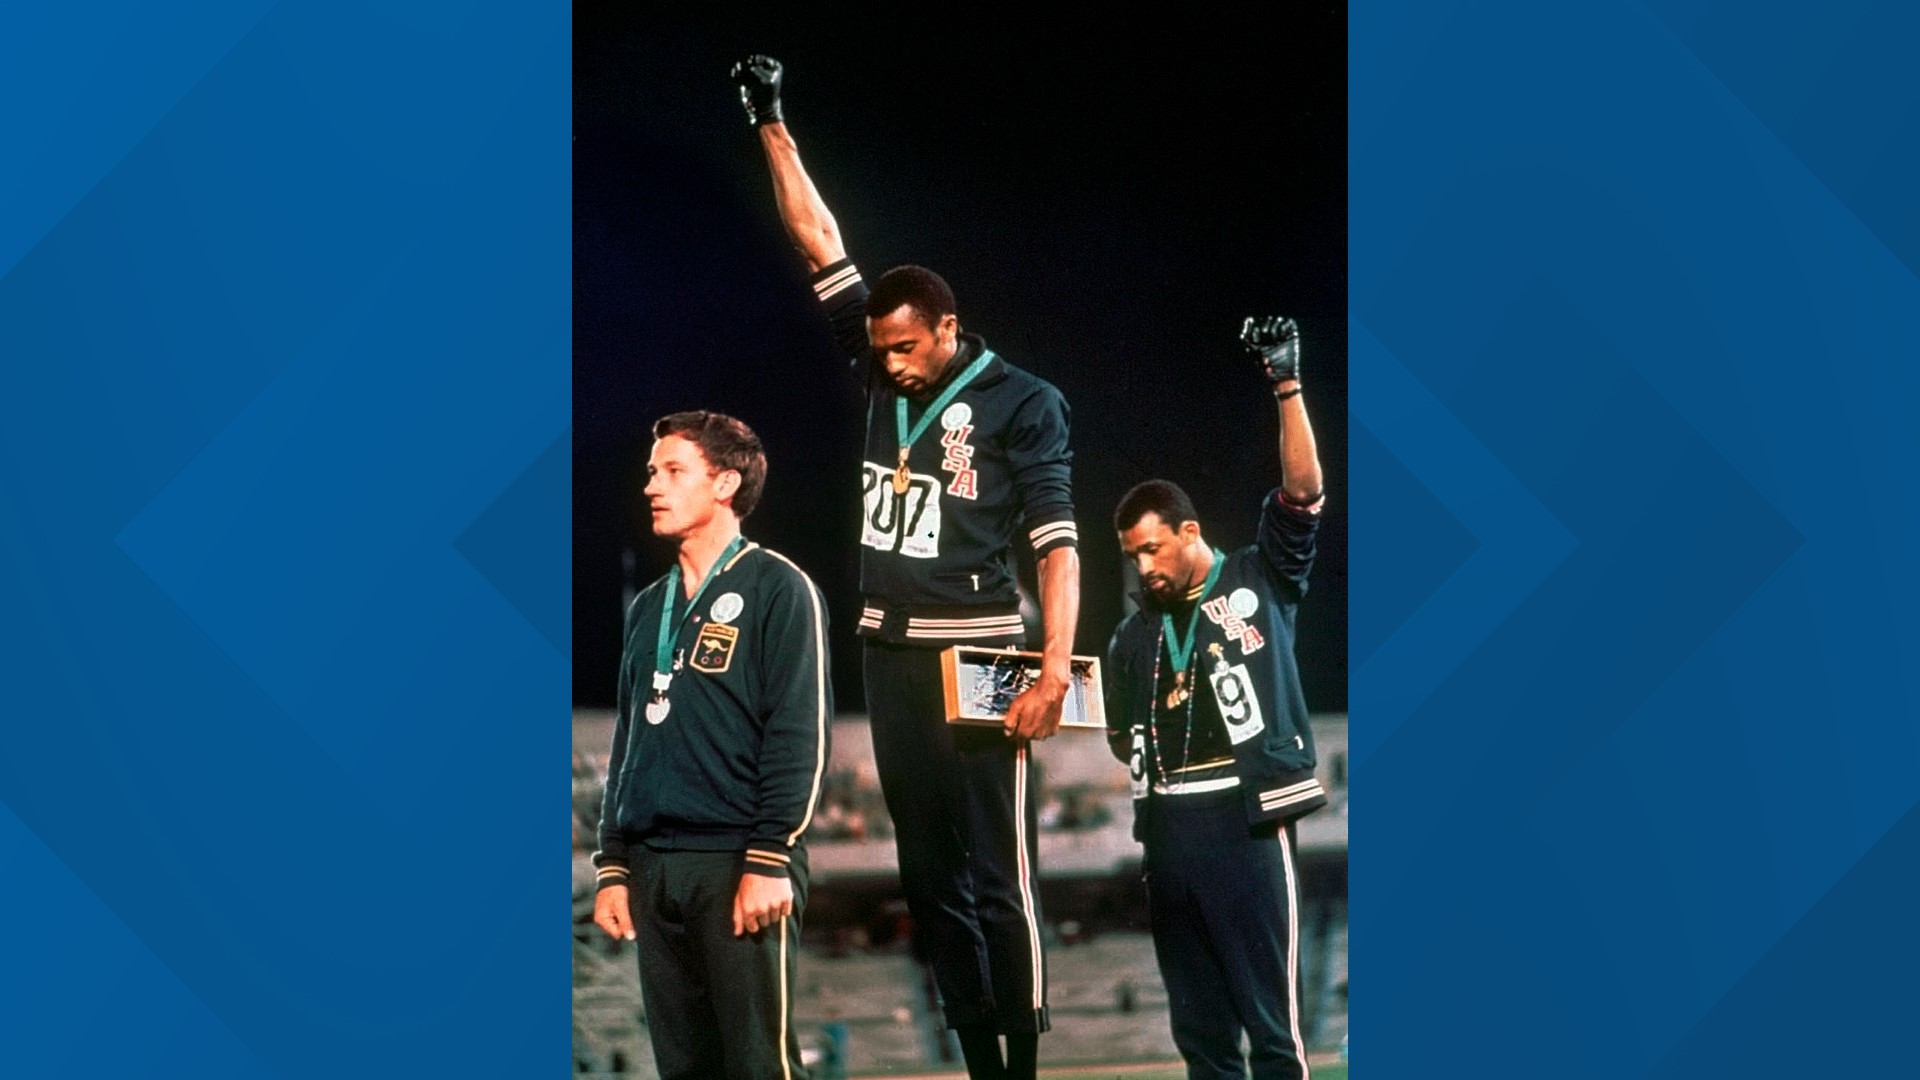 A moment remembered as one of the most overtly political and powerful statements happened on an Olympic stage in Mexico City.